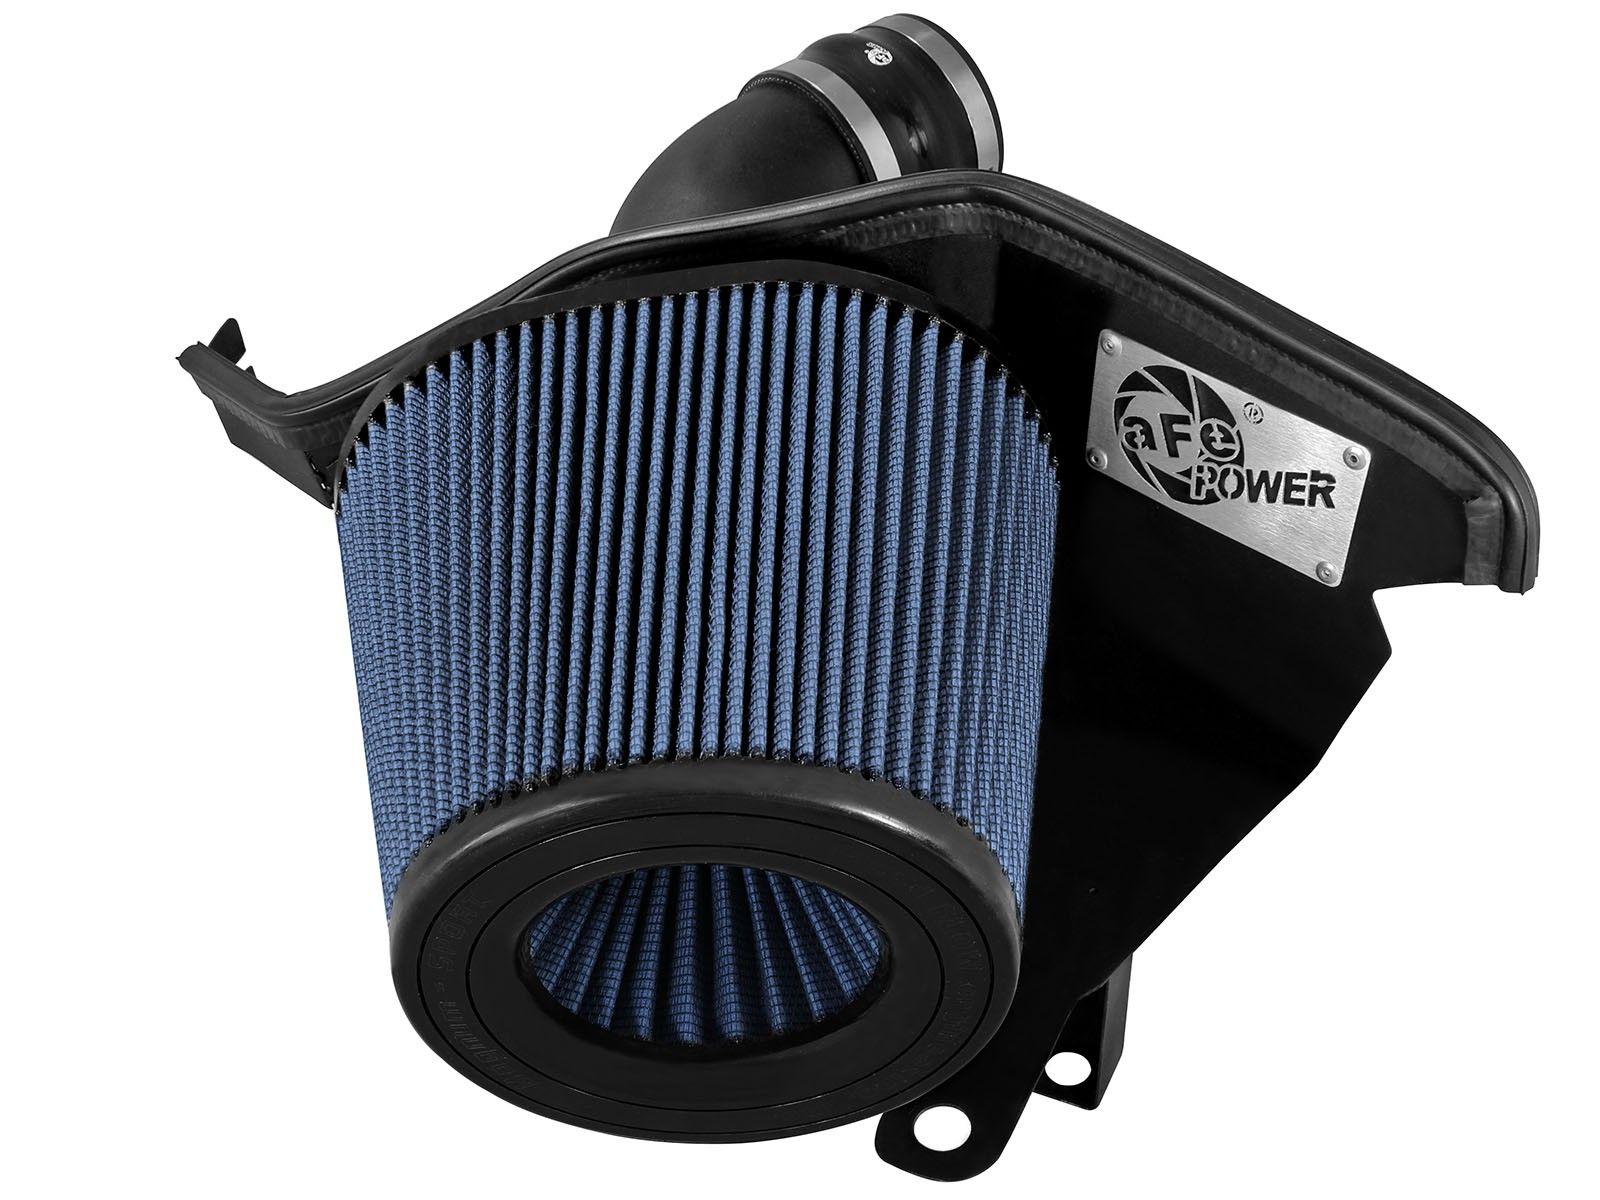 2012-2019 Jeep Grand Cherokee SRT HEMI V8 6.4L Magnum FORCE Stage-2 Cold Air Intake System w/Pro 2012 Jeep Grand Cherokee Engine Air Filter